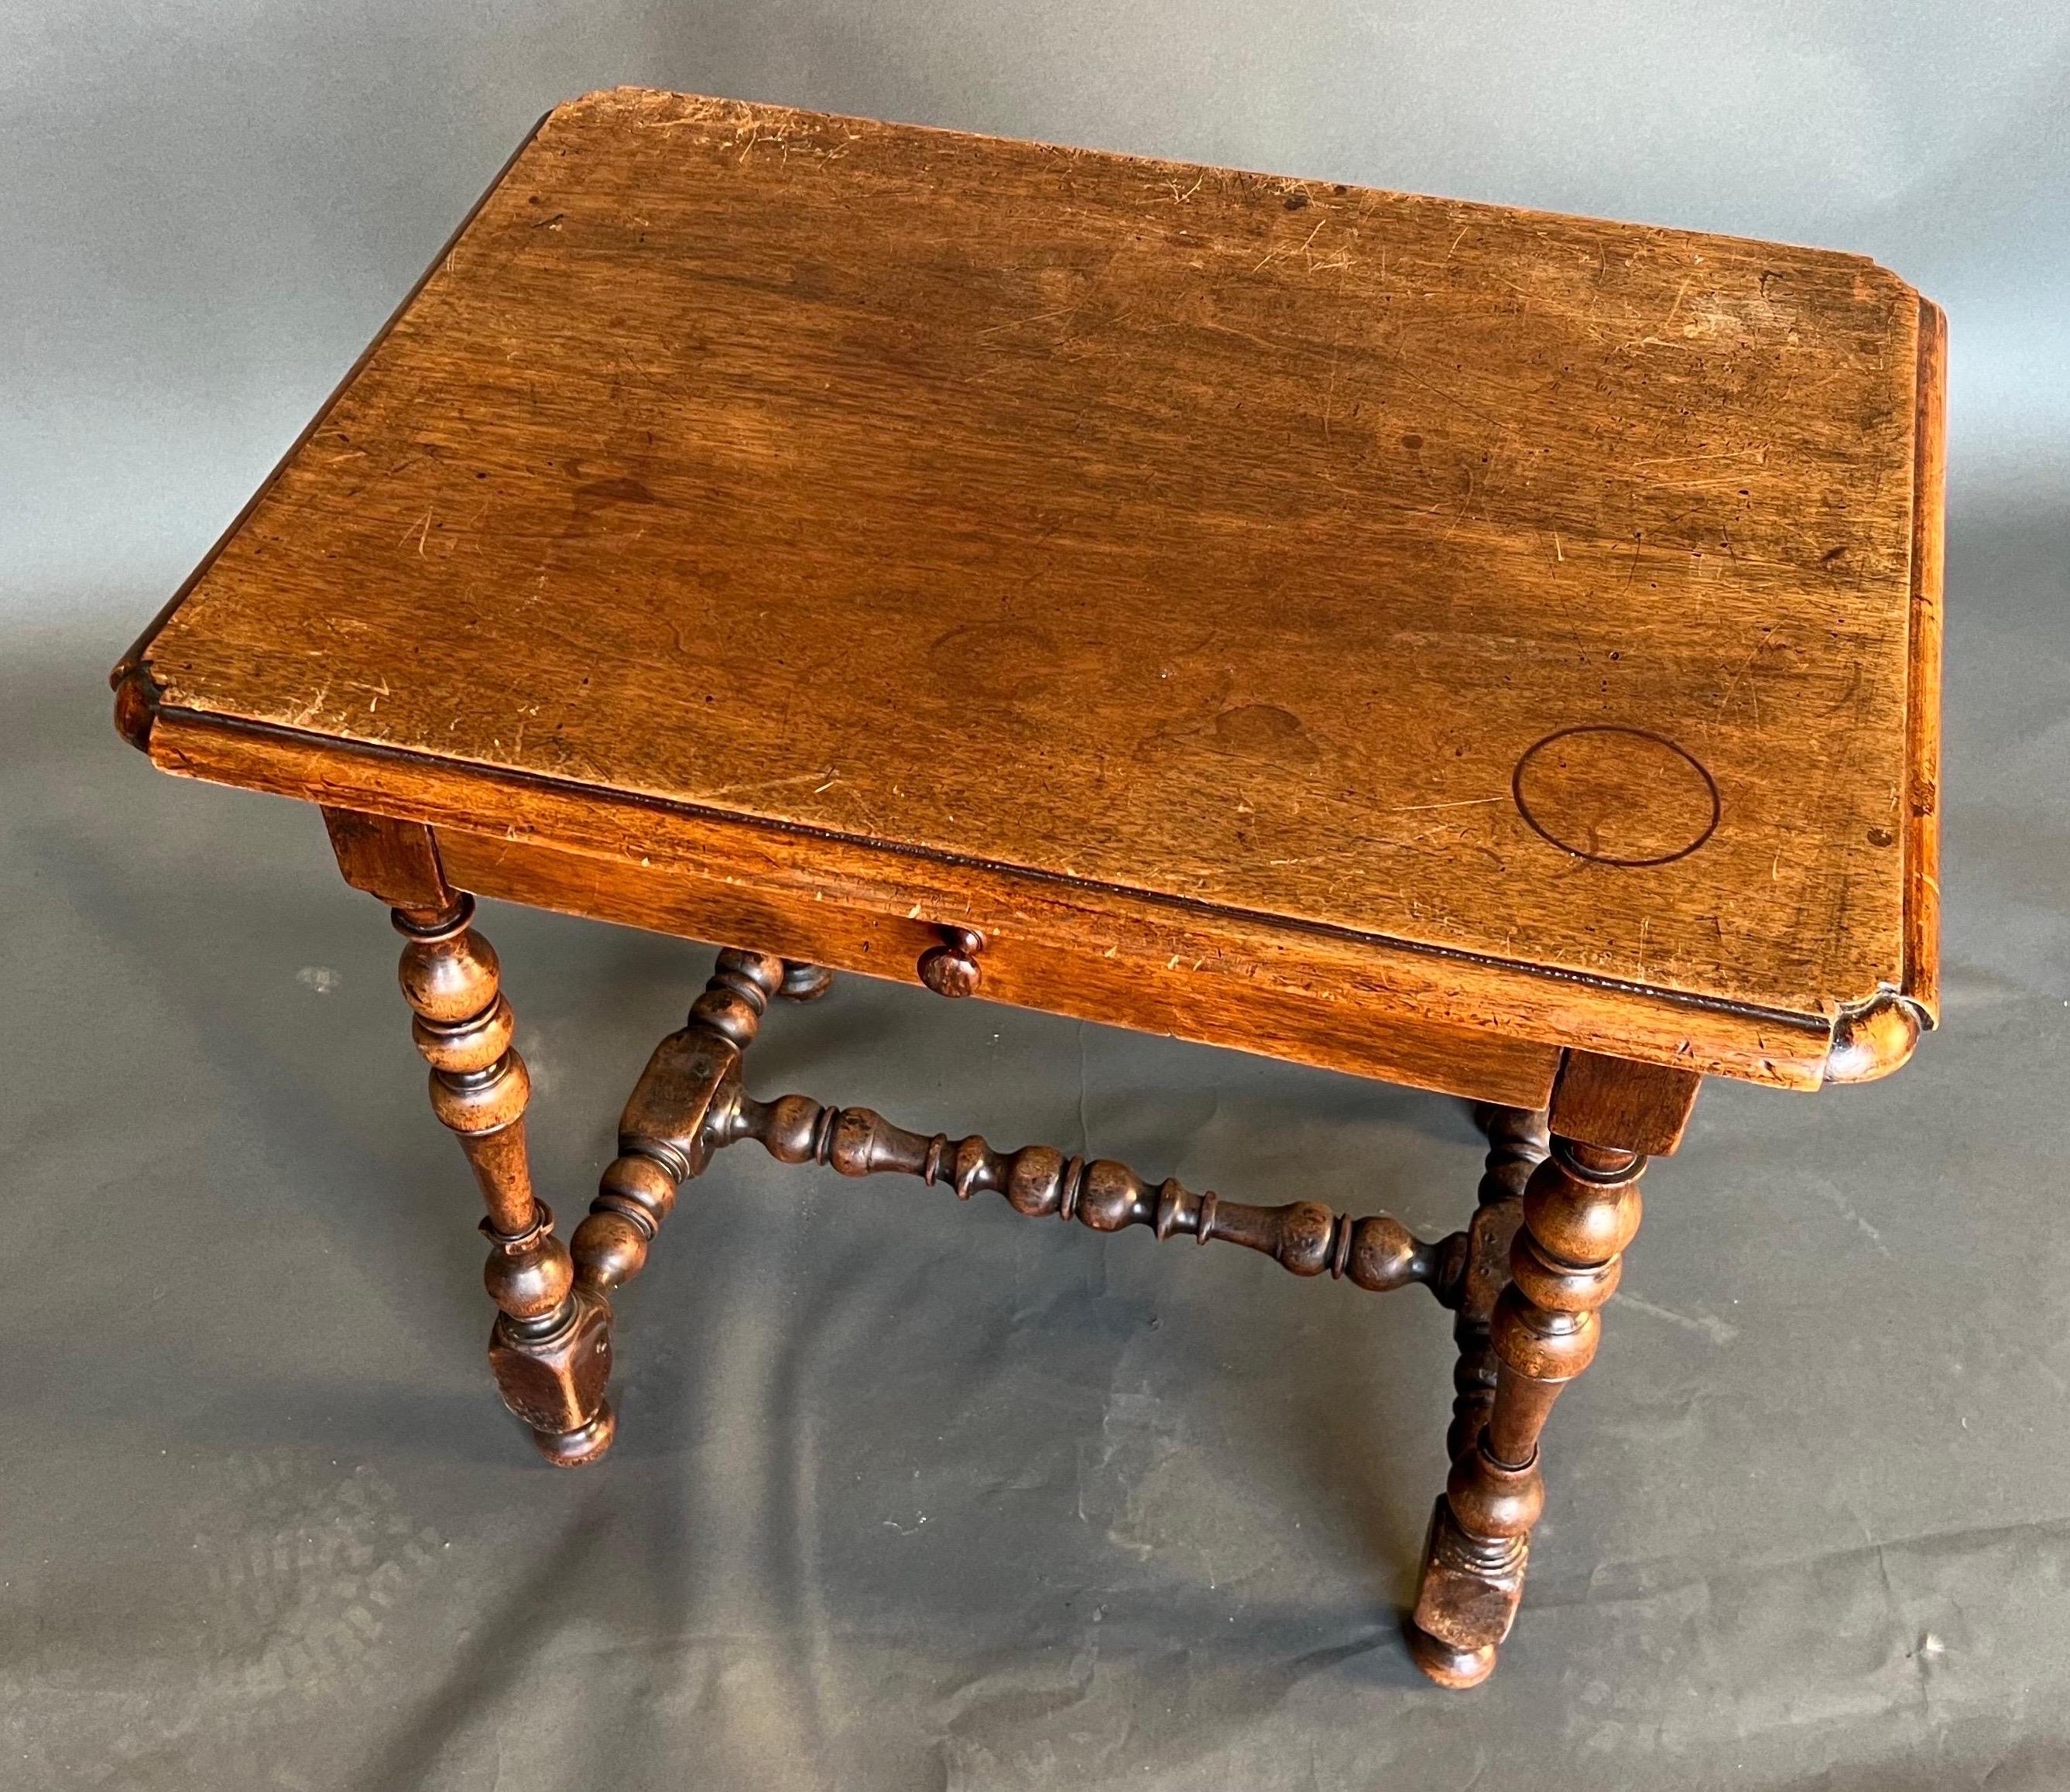 Prettiest little 19th century French walnut single drawer side or end table. Great color and patina. Turned legs and pinned construction. Great size to use in a variety of places.